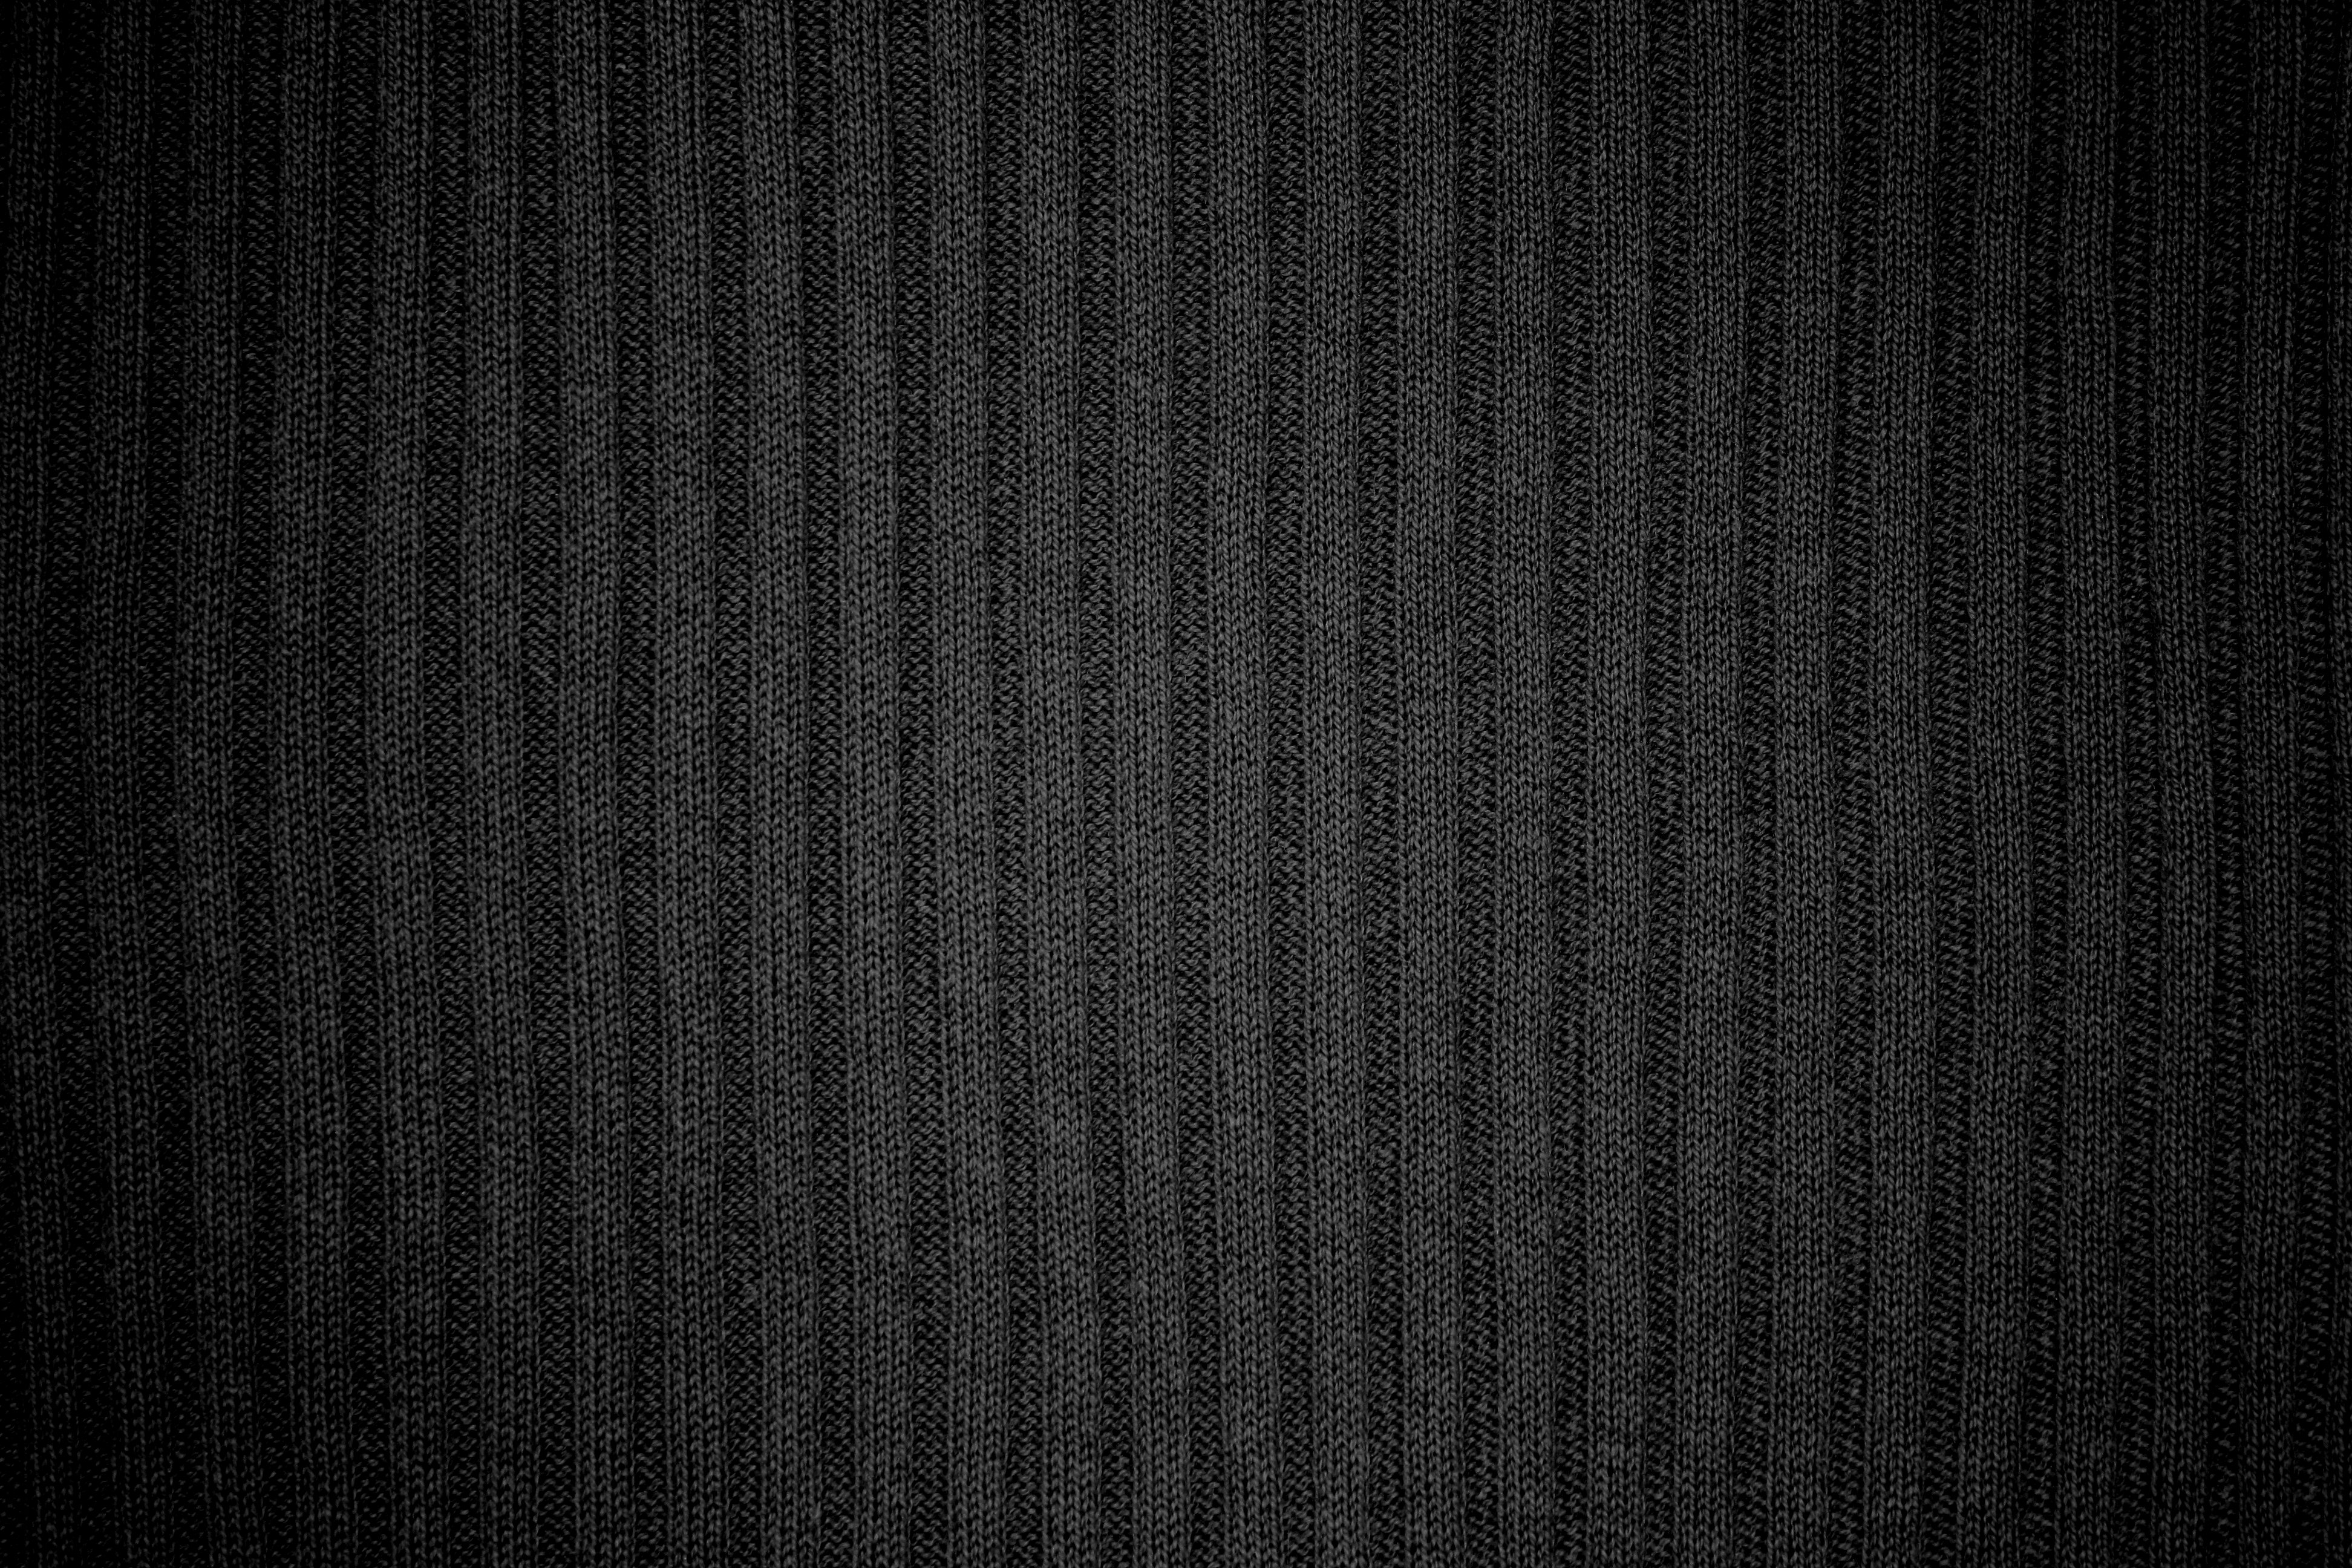 Black Ribbed Knit Fabric Texture Picture